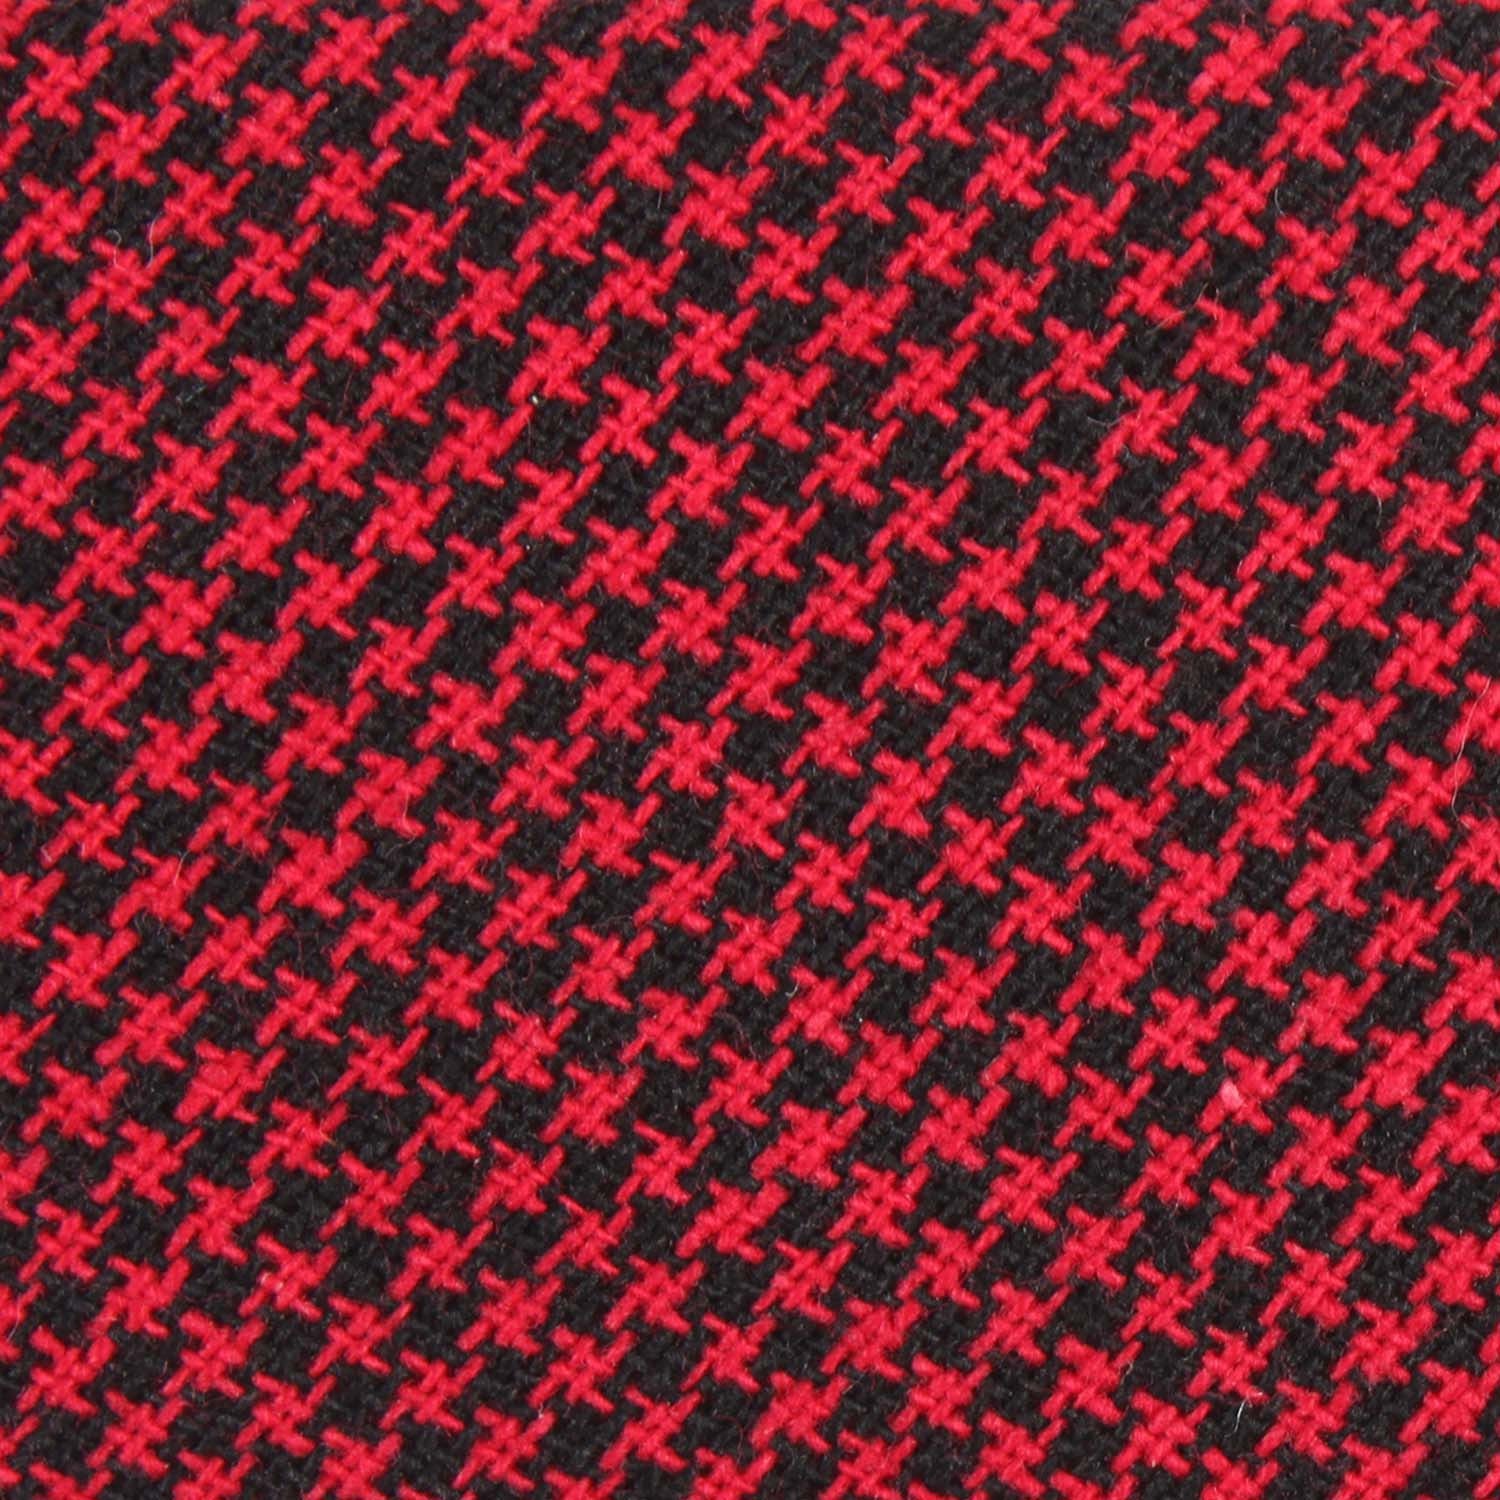 Red & Black Houndstooth Cotton Fabric Bow Tie C165